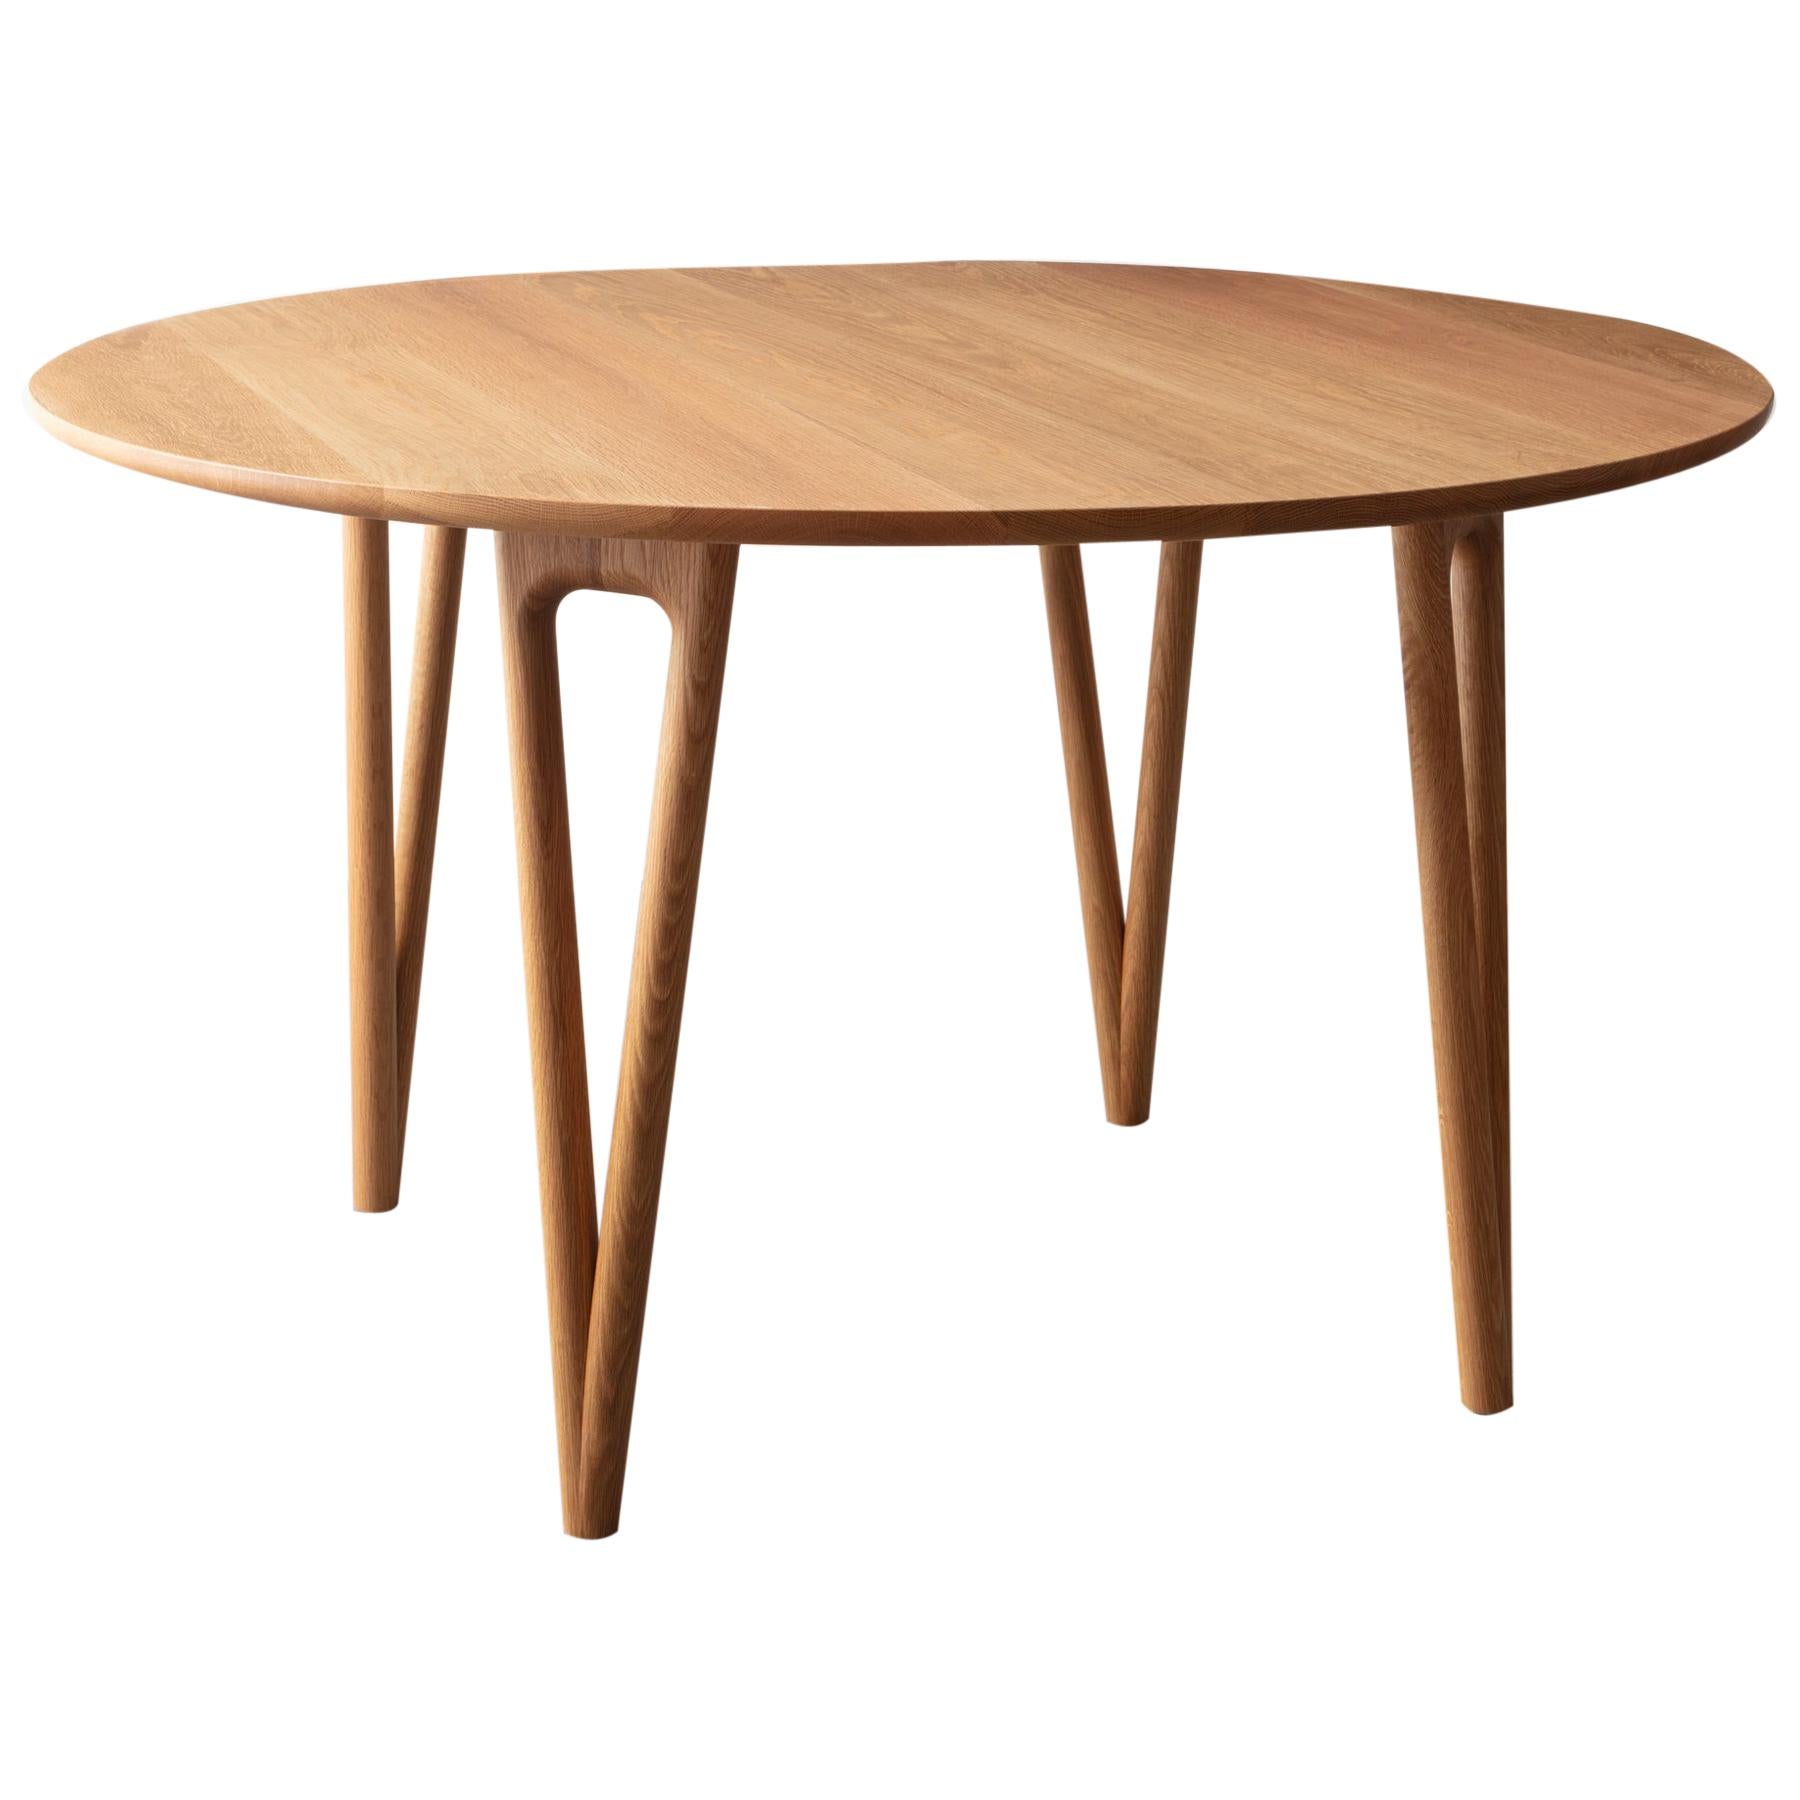 Hairpin Dining Table, Solid Wood, Made to Measure Shapes & Size, Handmade in USA